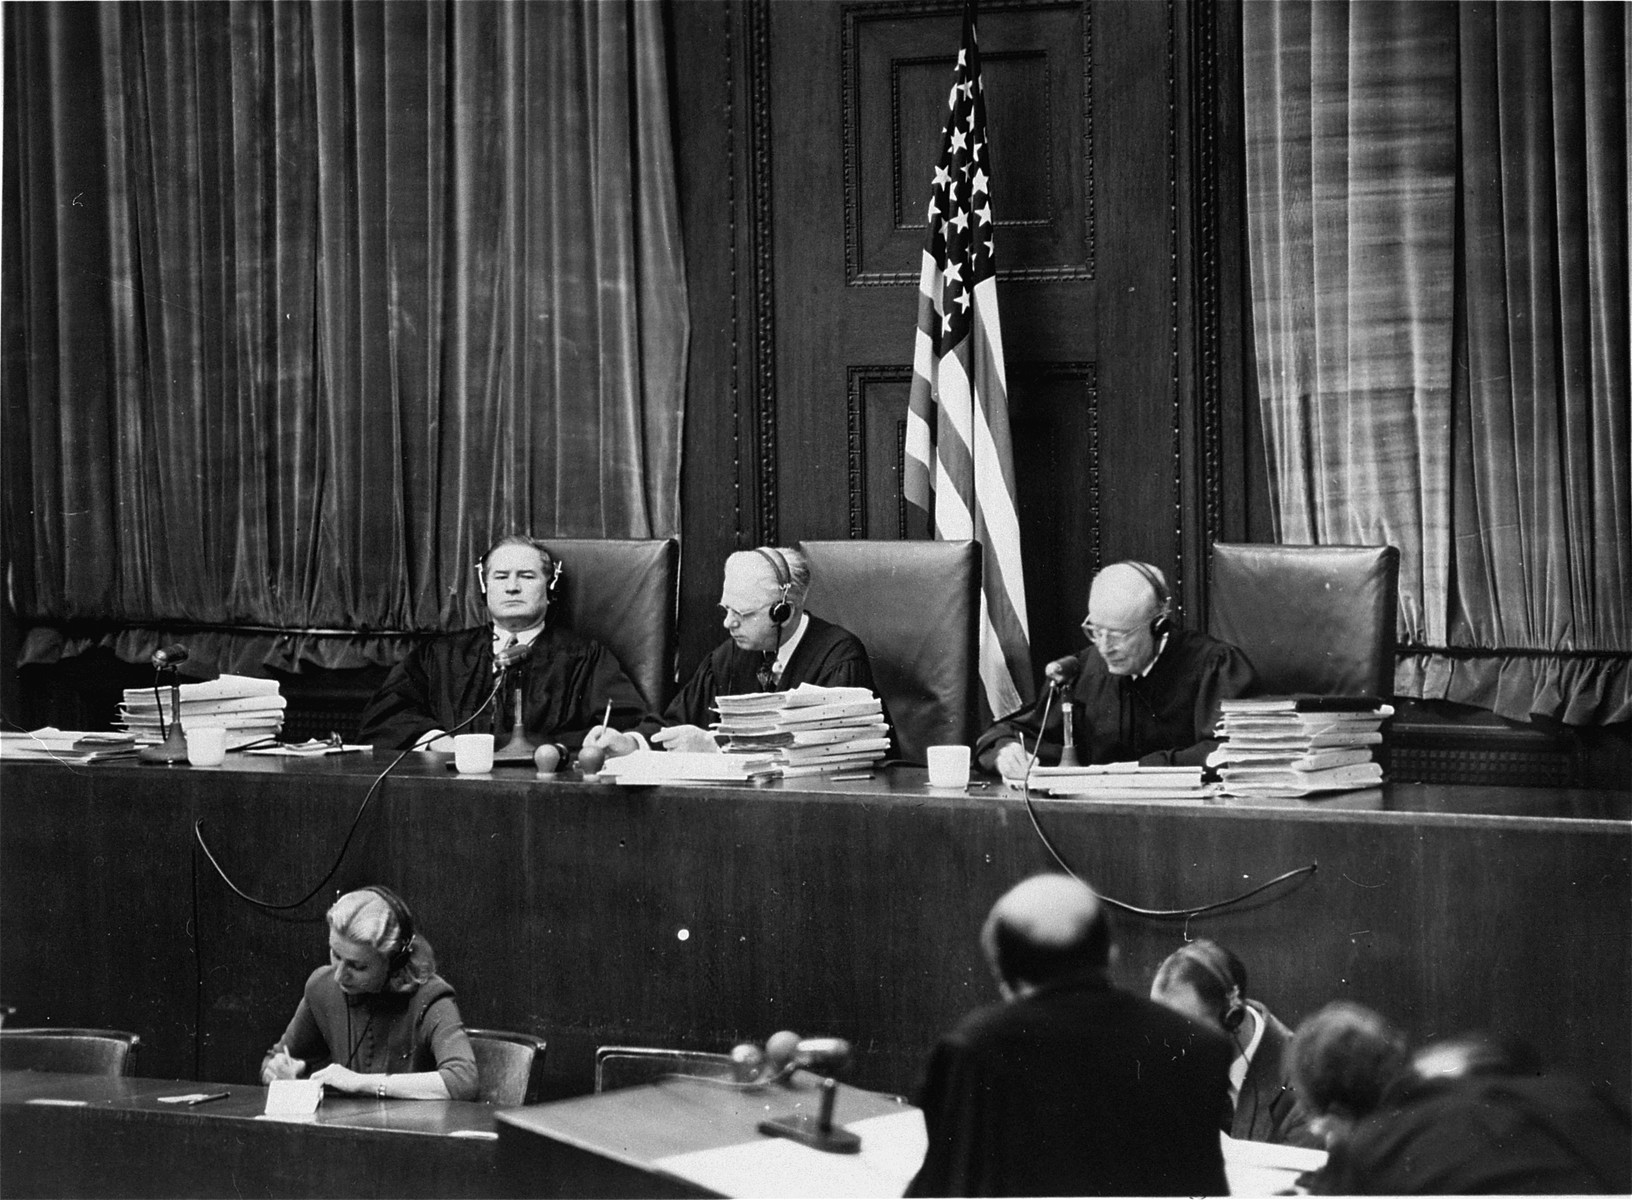 The members of the Tribunal at the Ministries Trial.  Seated from left to right are Leon W. Powers, Presiding Justice William C. Christianson, and Robert T. Maguire.